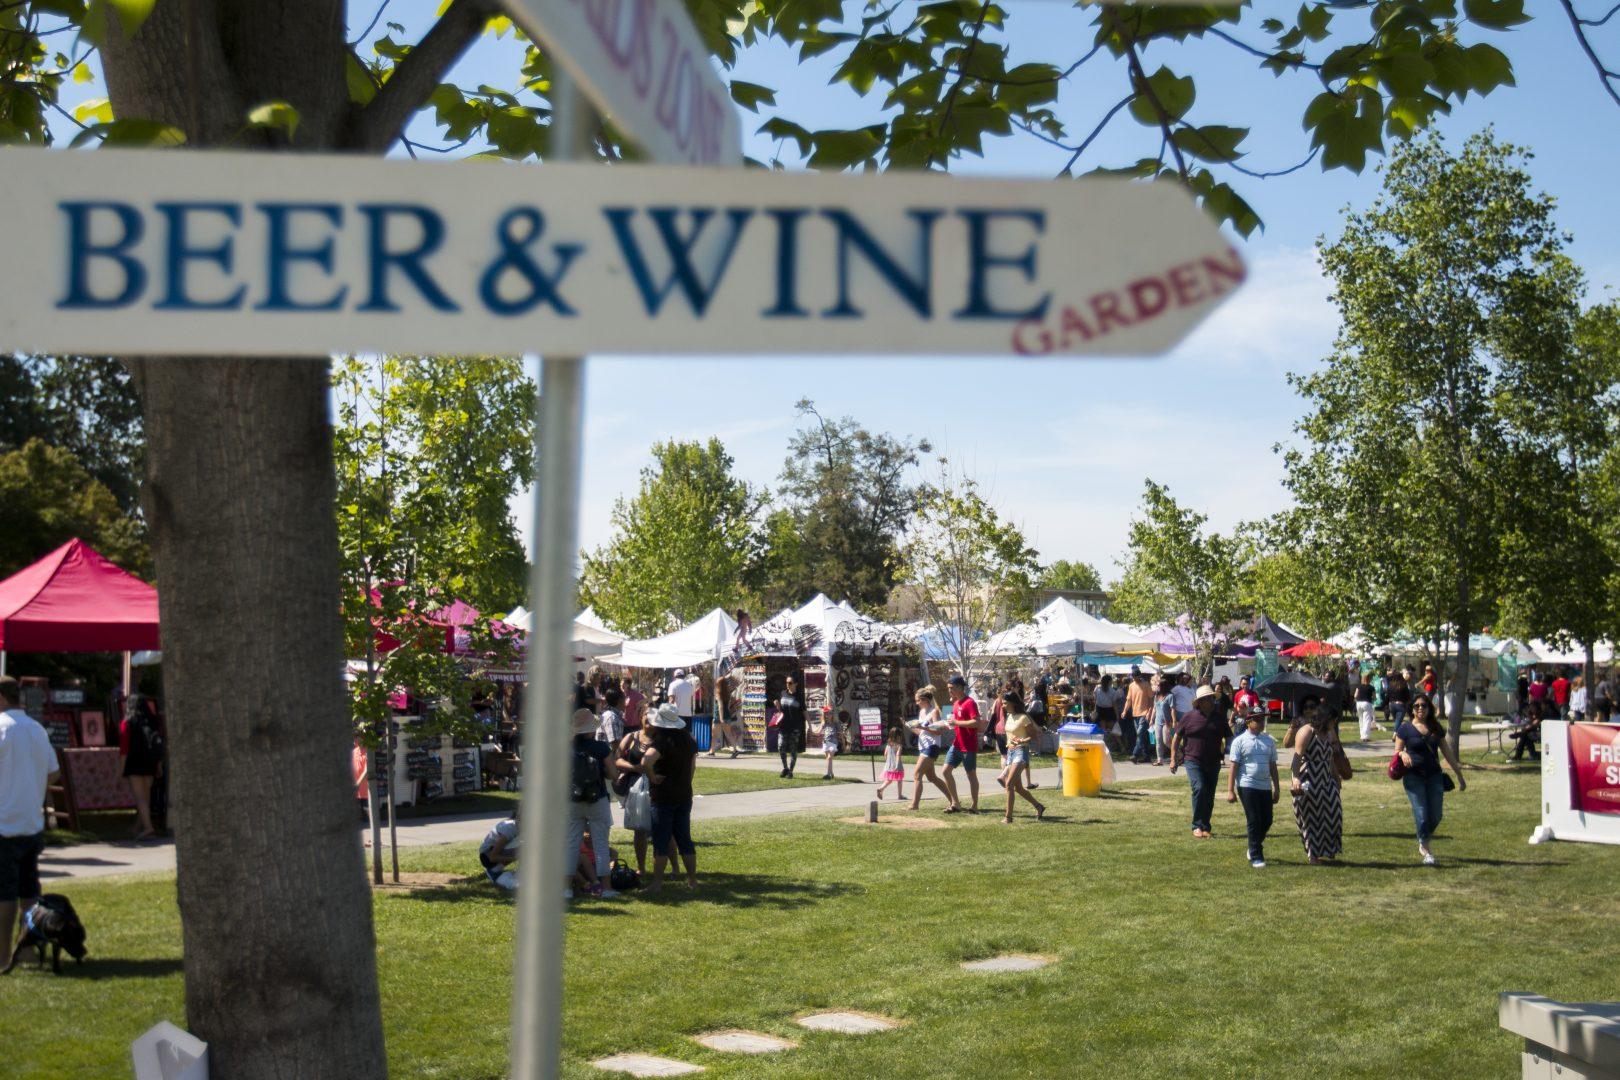 The sign pointing to the Beer & Wine Garden, one of the most popular attractions, at Vintage Days on April 22, 2018. (Ramuel Reyes/The Collegian)